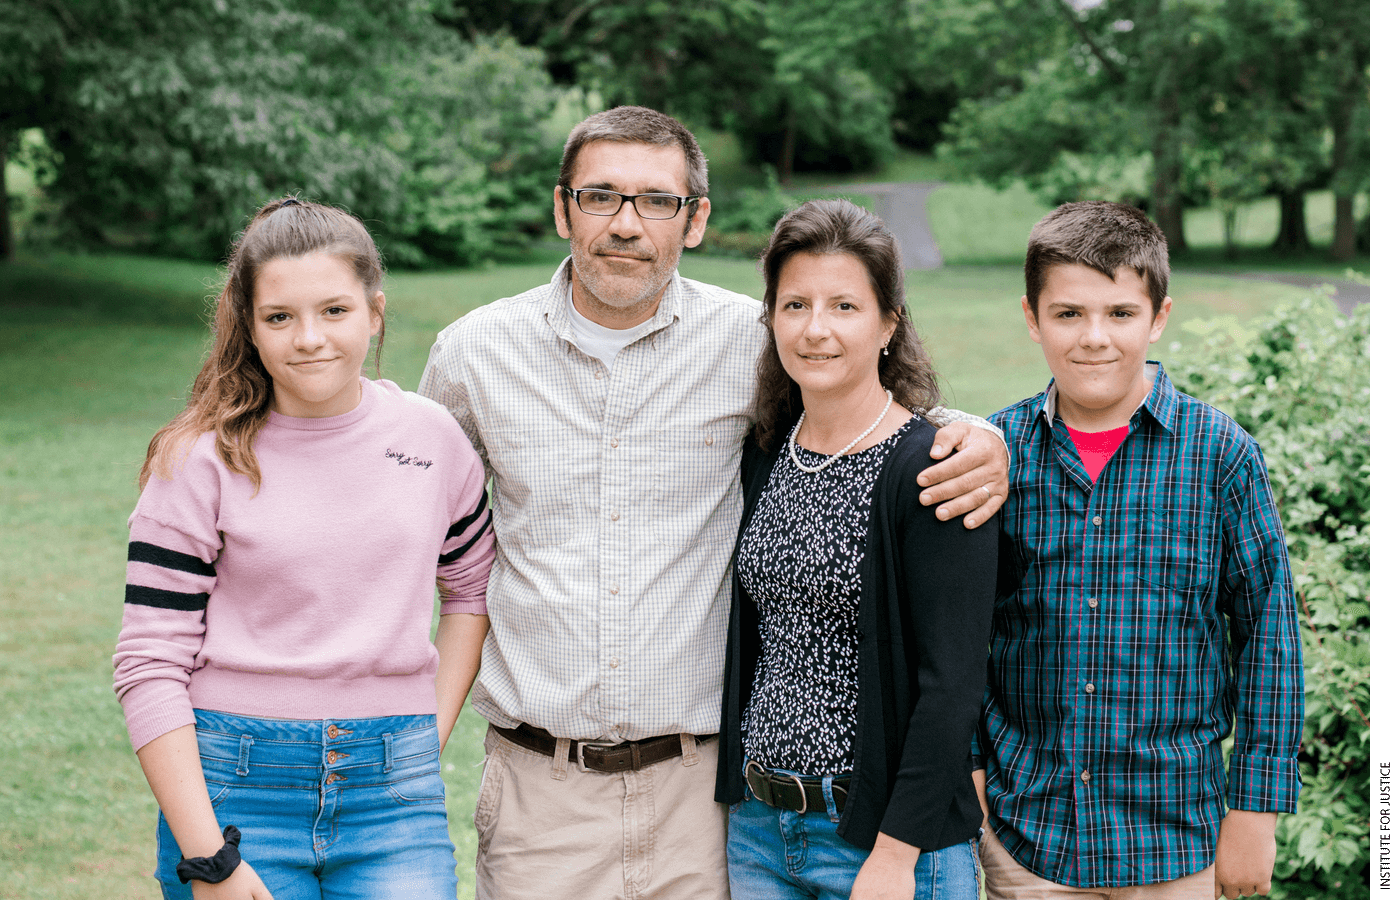 Troy and Angela Nelson, with children Alicia and Royce, were plaintiffs in Carson v. Makin who wanted religious education included in "town tuitioning."